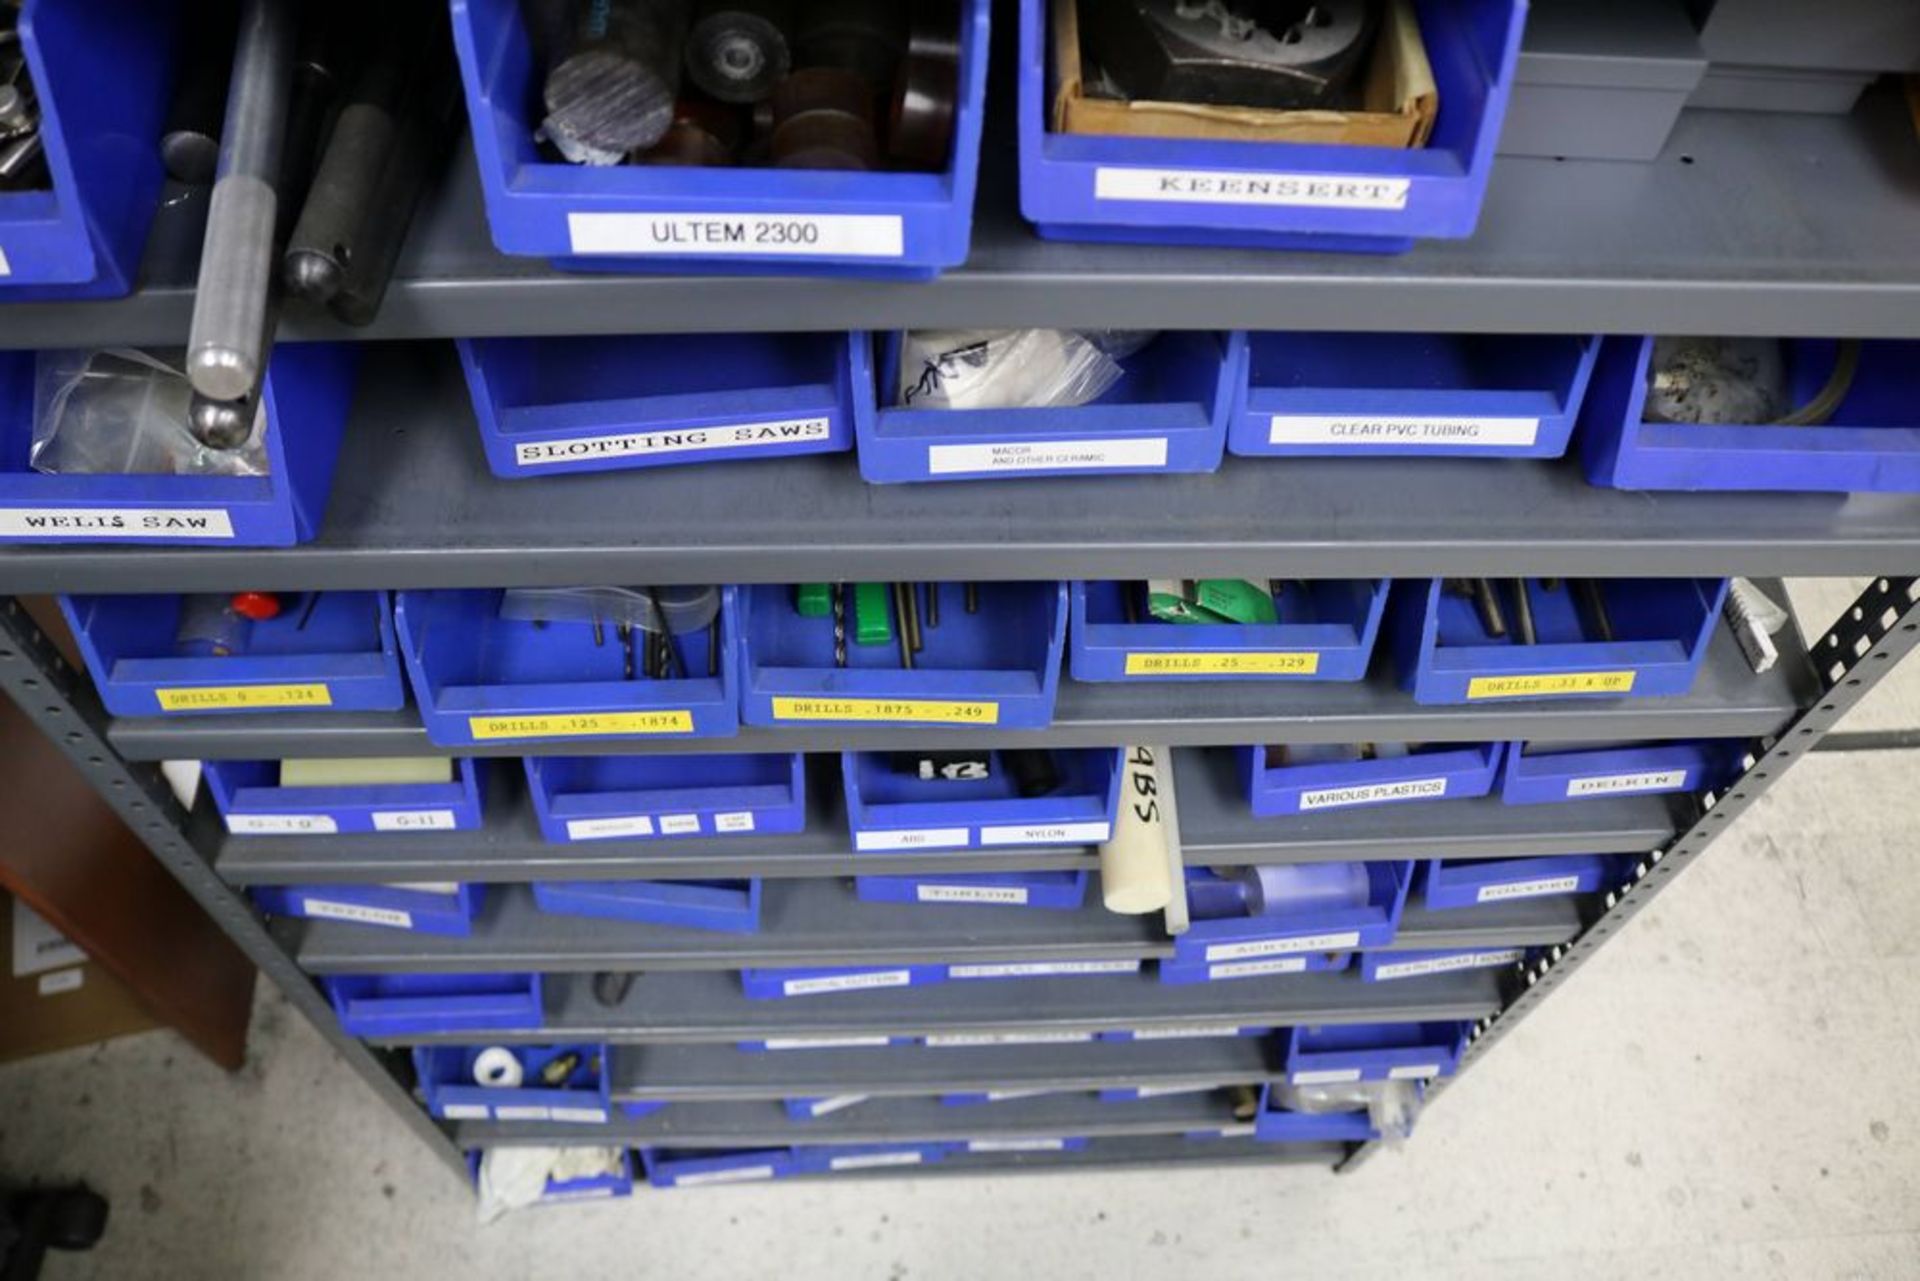 13 Tier Steel Shelf with Organizer Bins full of Various Items, Drills, Tap Handles, Air Fittings and - Image 4 of 15